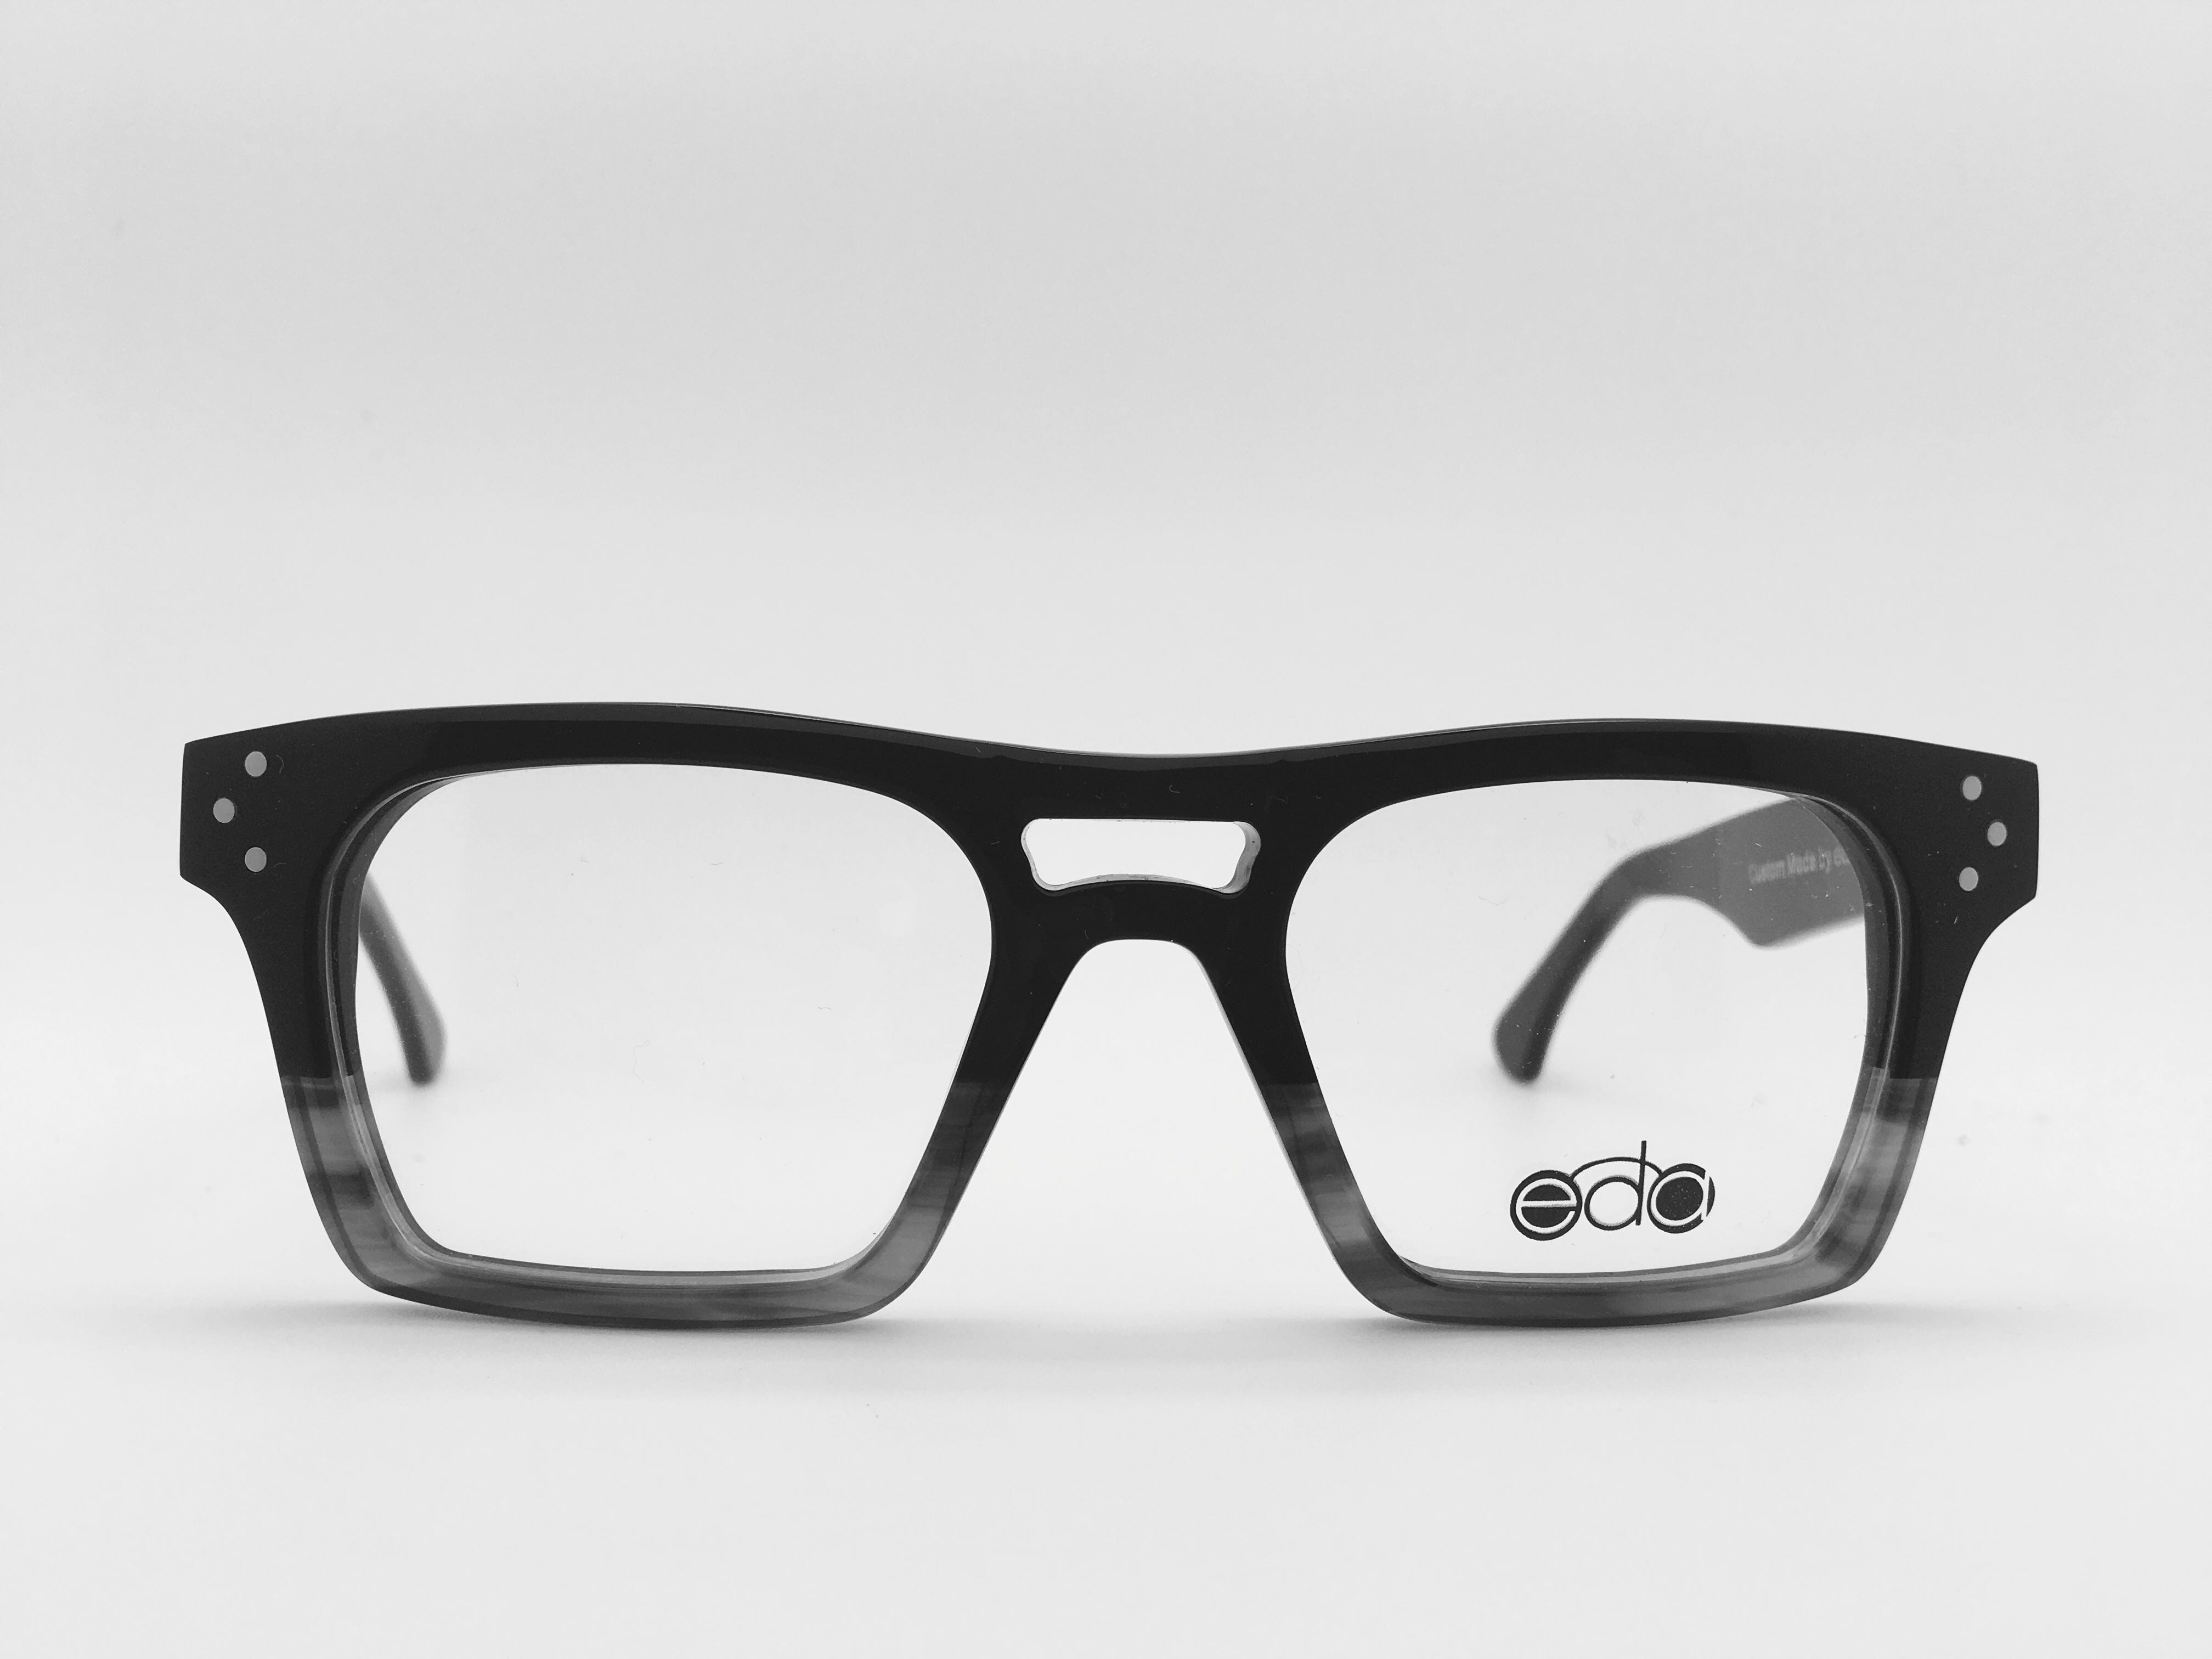 Some of the Best Eyeglass Frames for very Thick Lenses